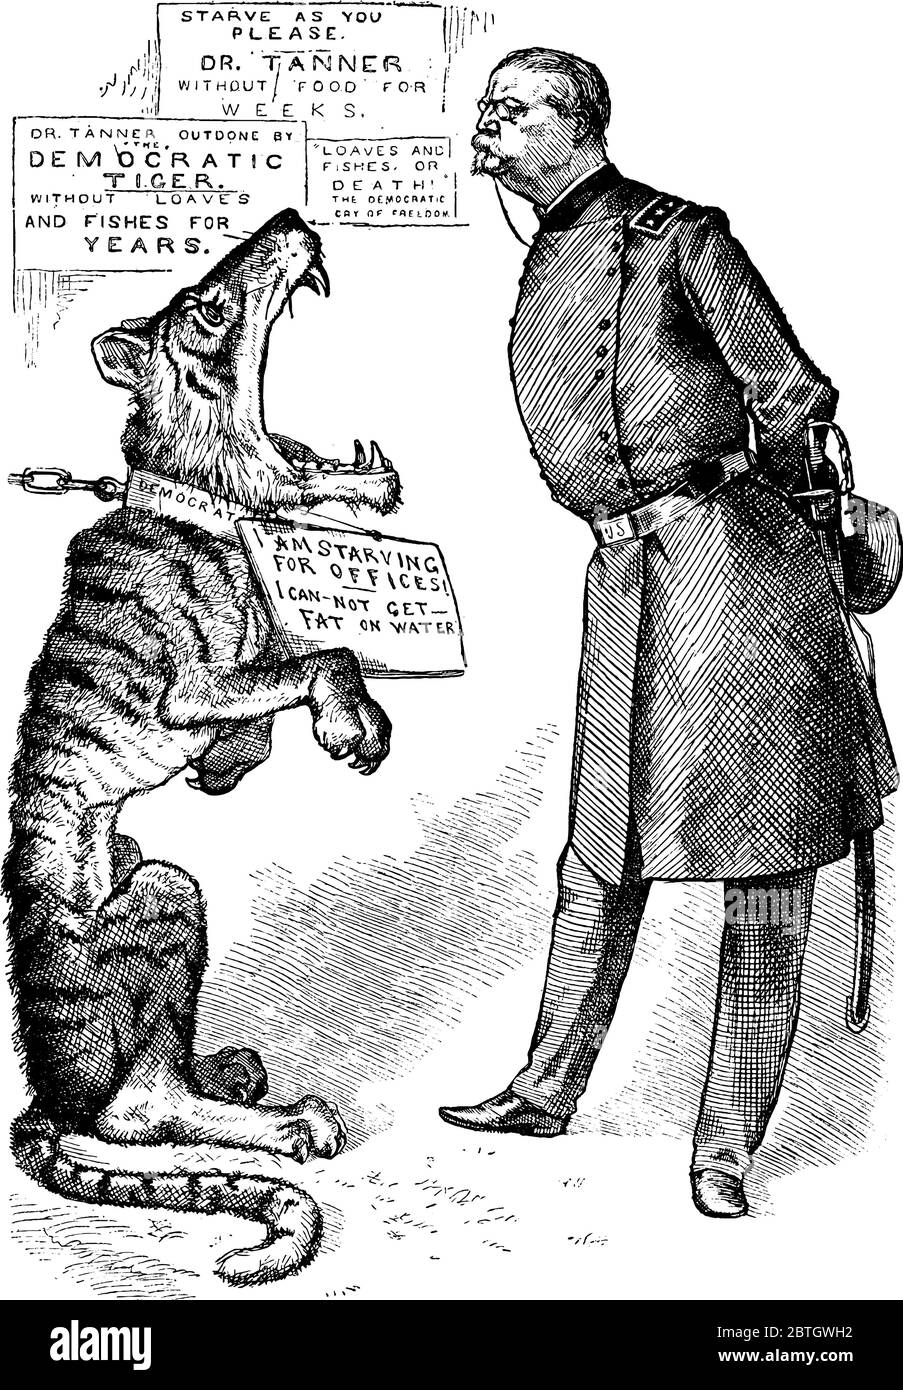 Cartoon by Thomas Nast depicting General Hancock chained Tiger (Republican Party) during the 1880 Presidential Elections, vintage line drawing or engr Stock Vector